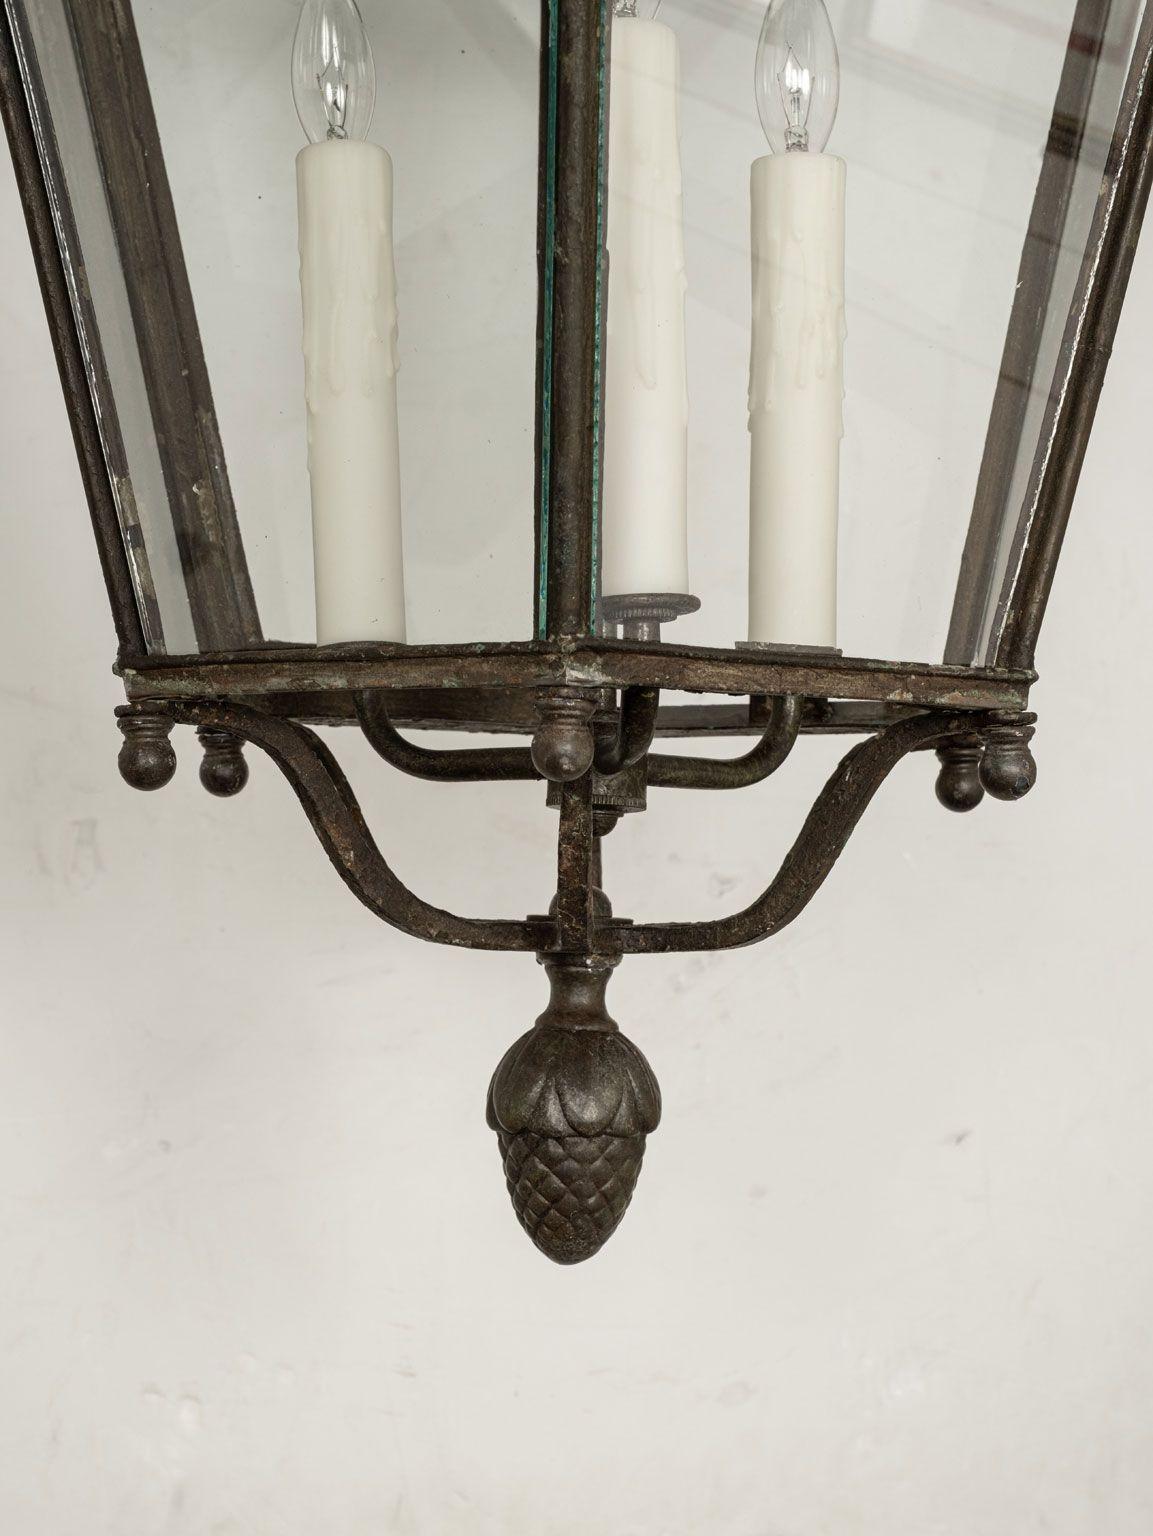 19th century French lantern in tole, iron and glass. Repousse decoration. Circa 1860-1899. Newly wired with a three candelabra socket drop-cluster. Includes chain and a canopy (listed height does not include chain).